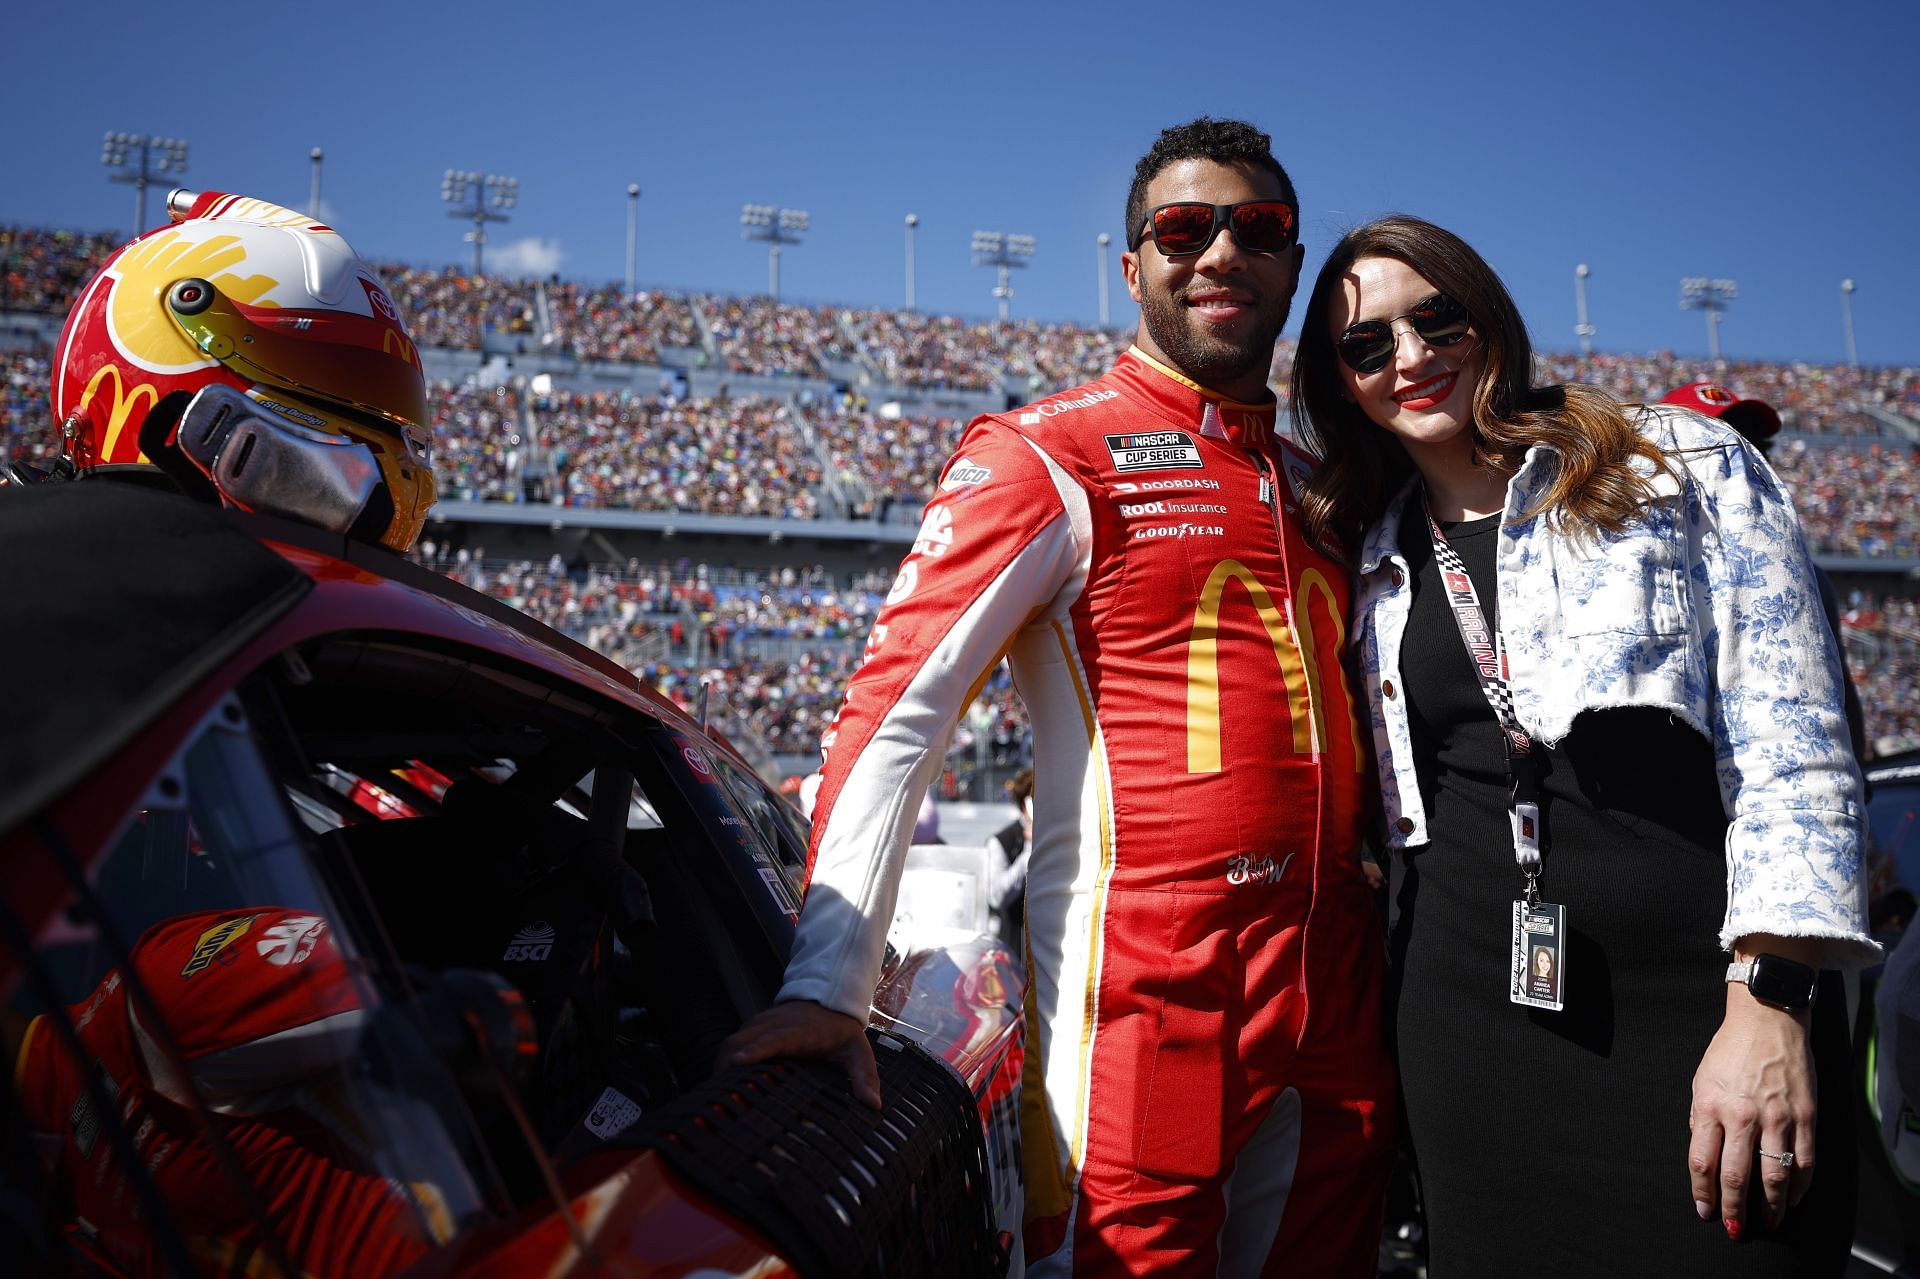 Bubba Wallace Jr. and fiance Amanda Carter on the grid before the 2022 NASCAR Cup Series 64th Annual Daytona 500 at Daytona International Speedway in Daytona Beach, Florida. (Photo by Jared C. Tilton/Getty Images)